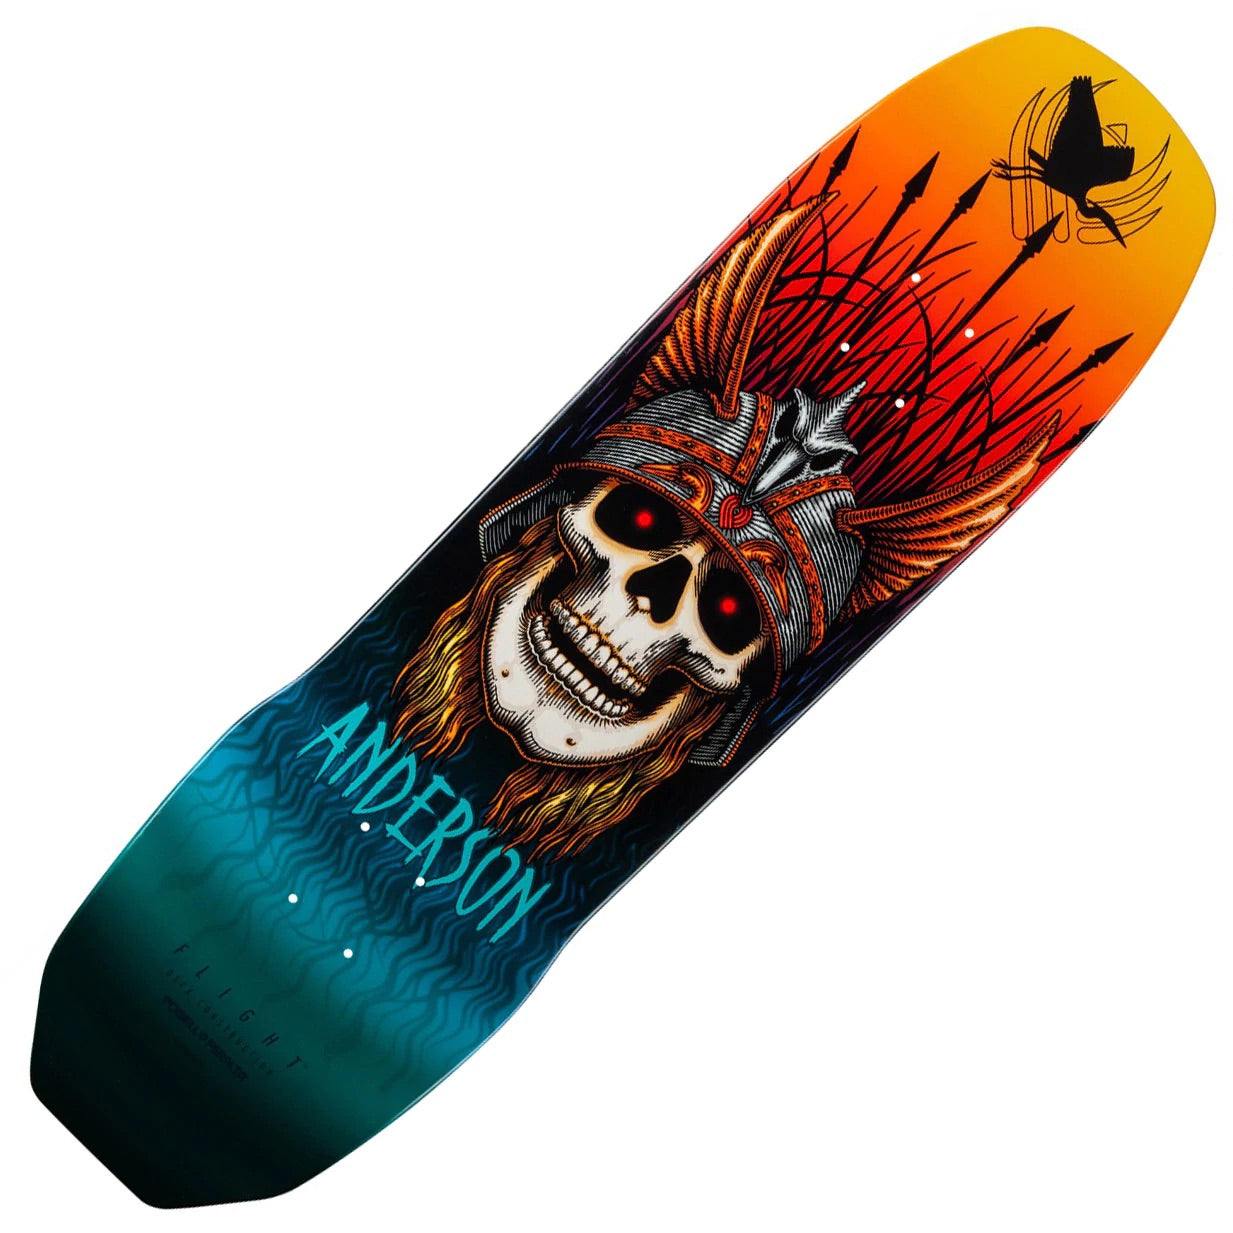 POWELL PERALTA ANDY ANDERSON FLIGHT DECK SHAPE 290 9.13